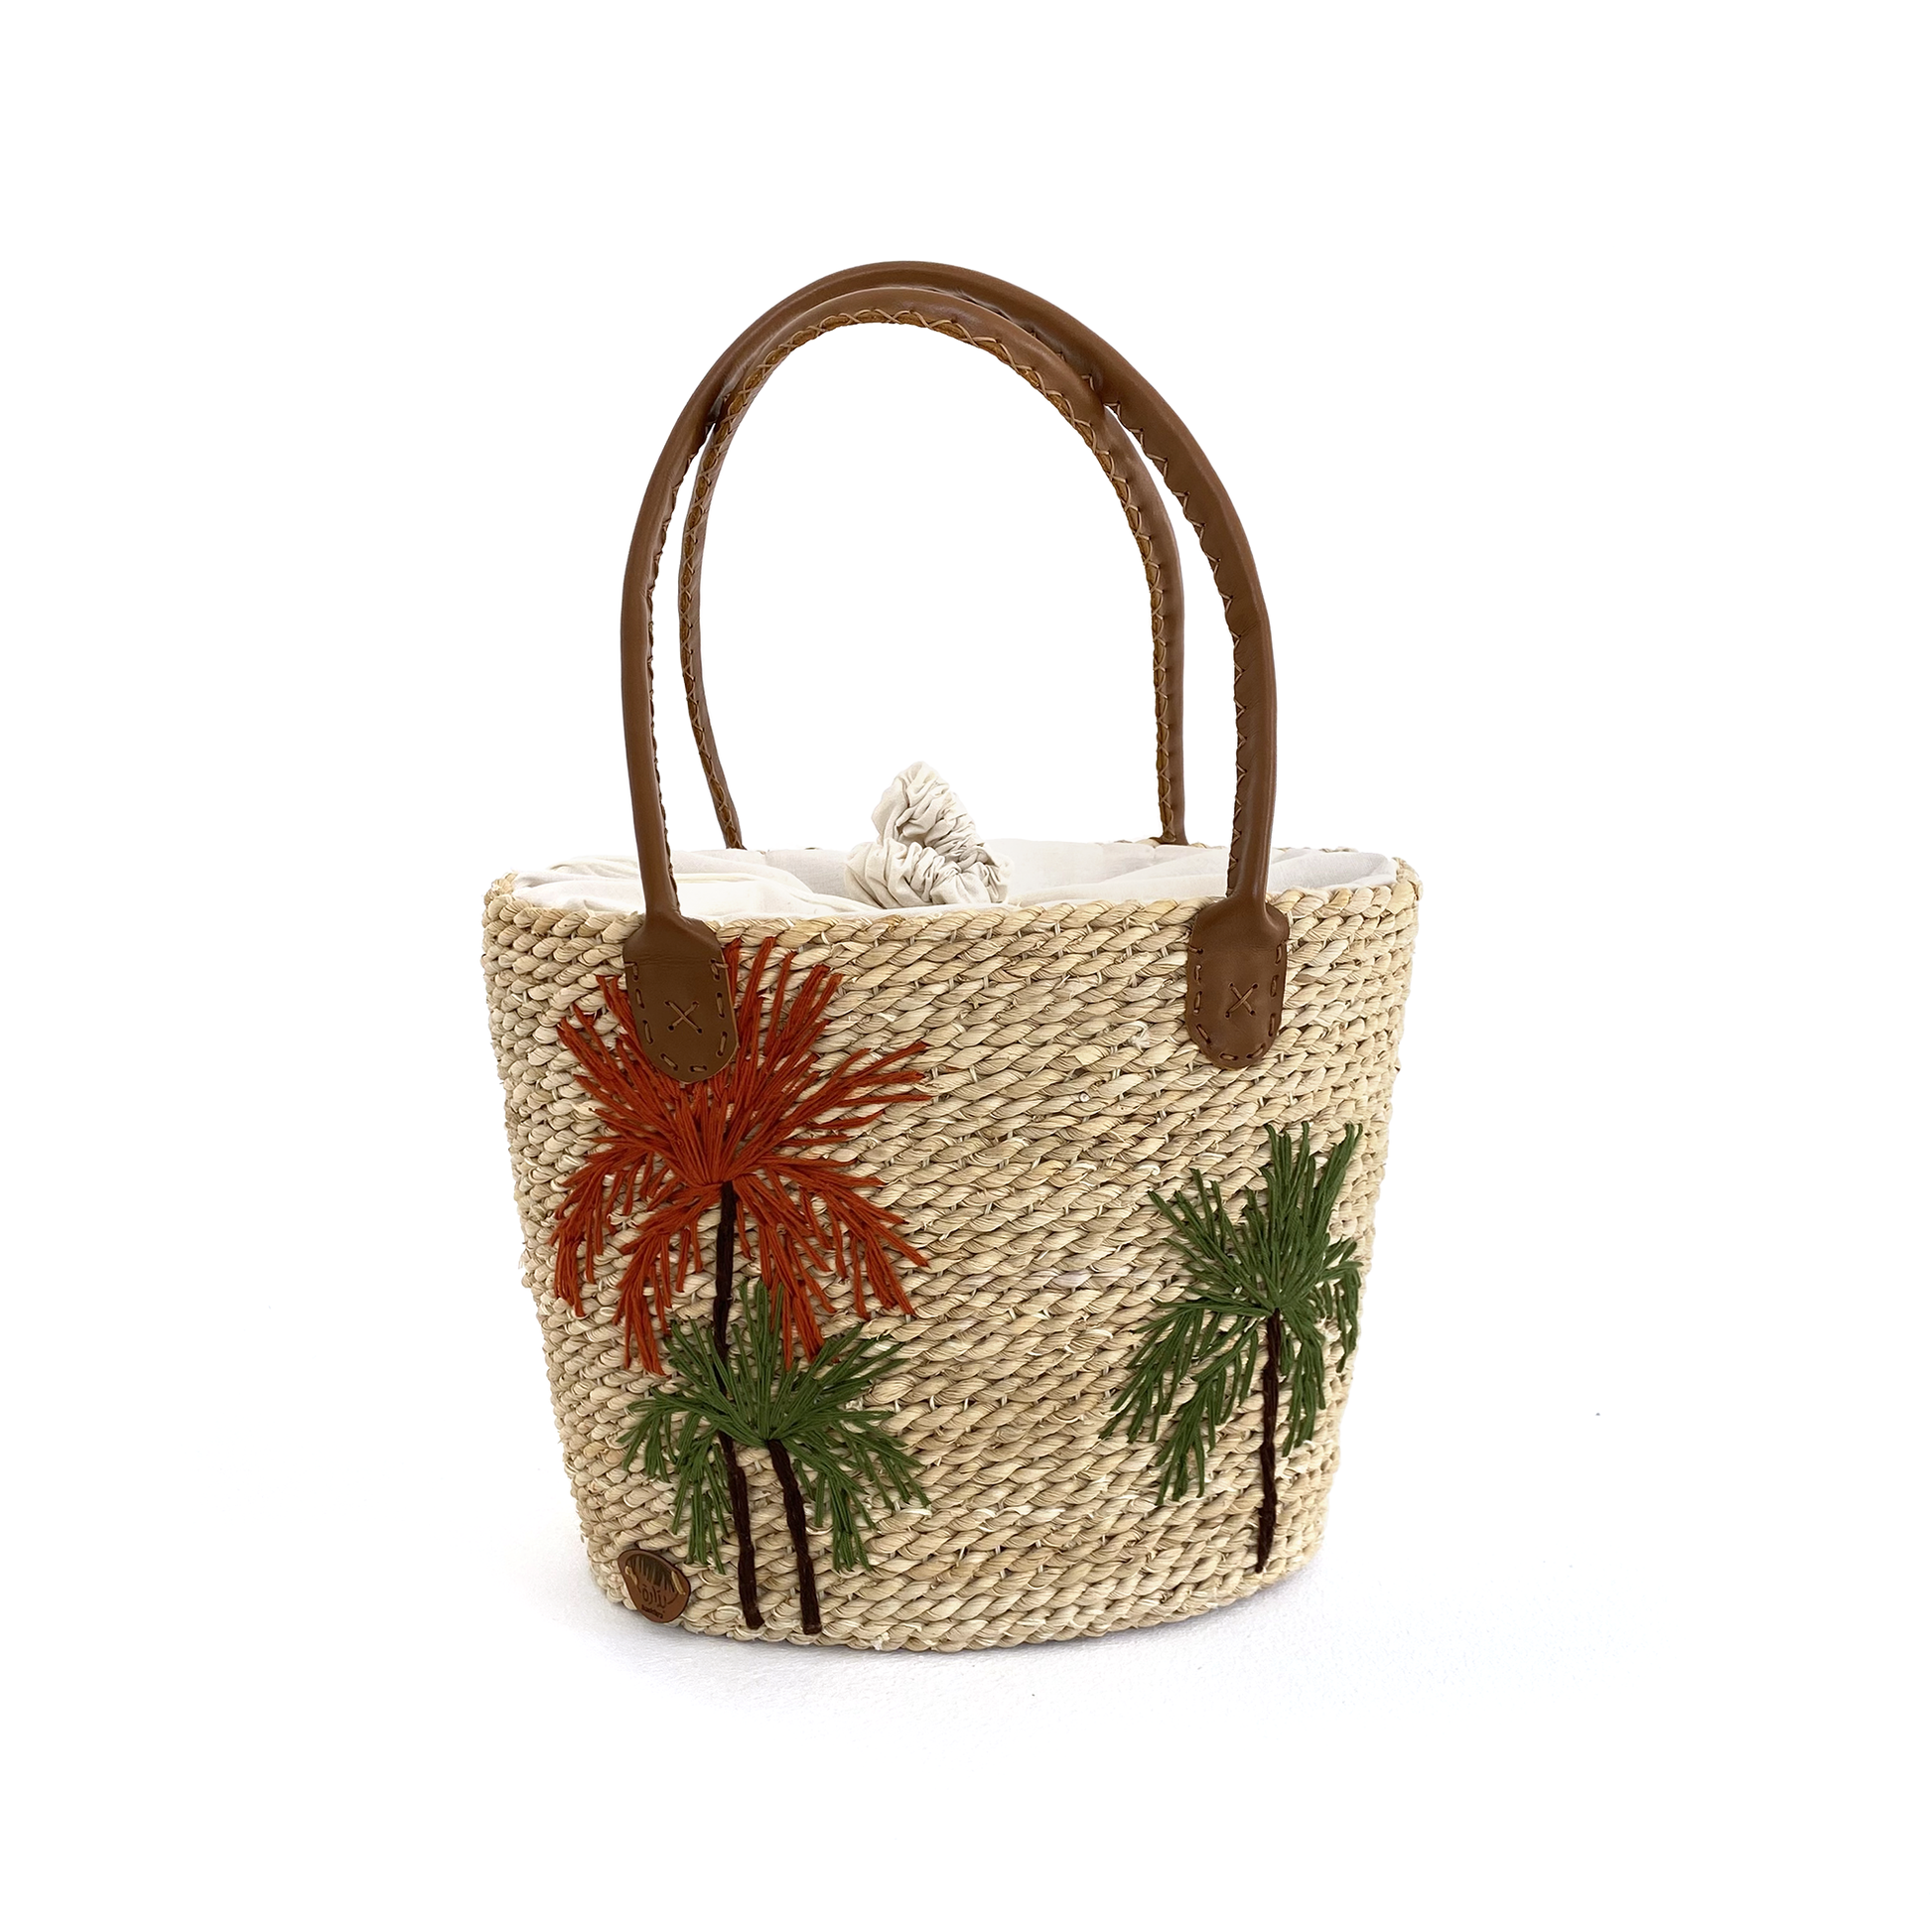 Embroidered Corn Bag with leather handle حقيبة مطرزة بيد جلد